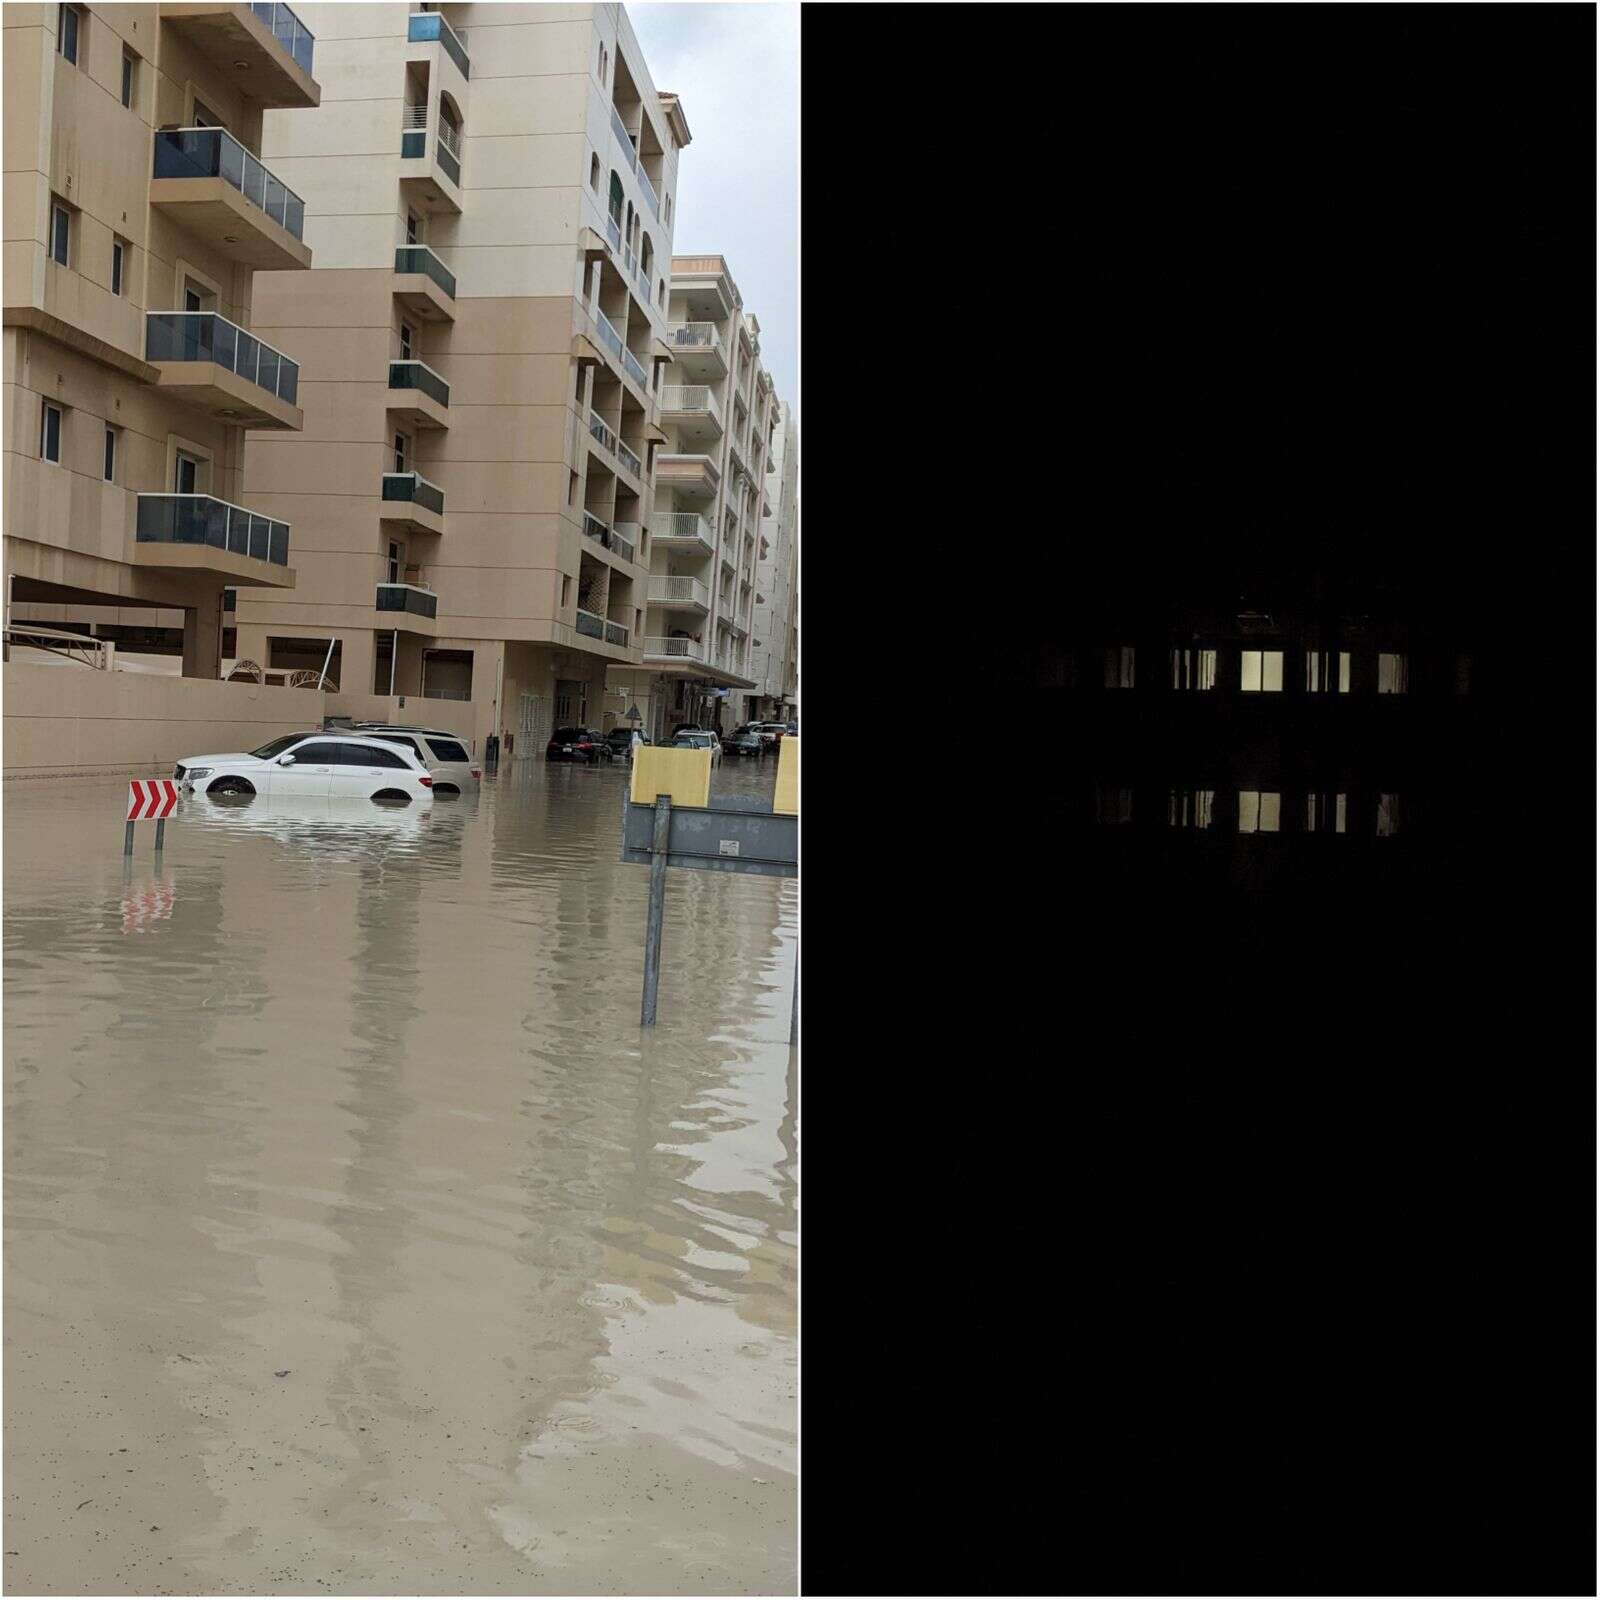 'we underestimated this storm': uae residents face electricity, water outages after flooding, heavy rains